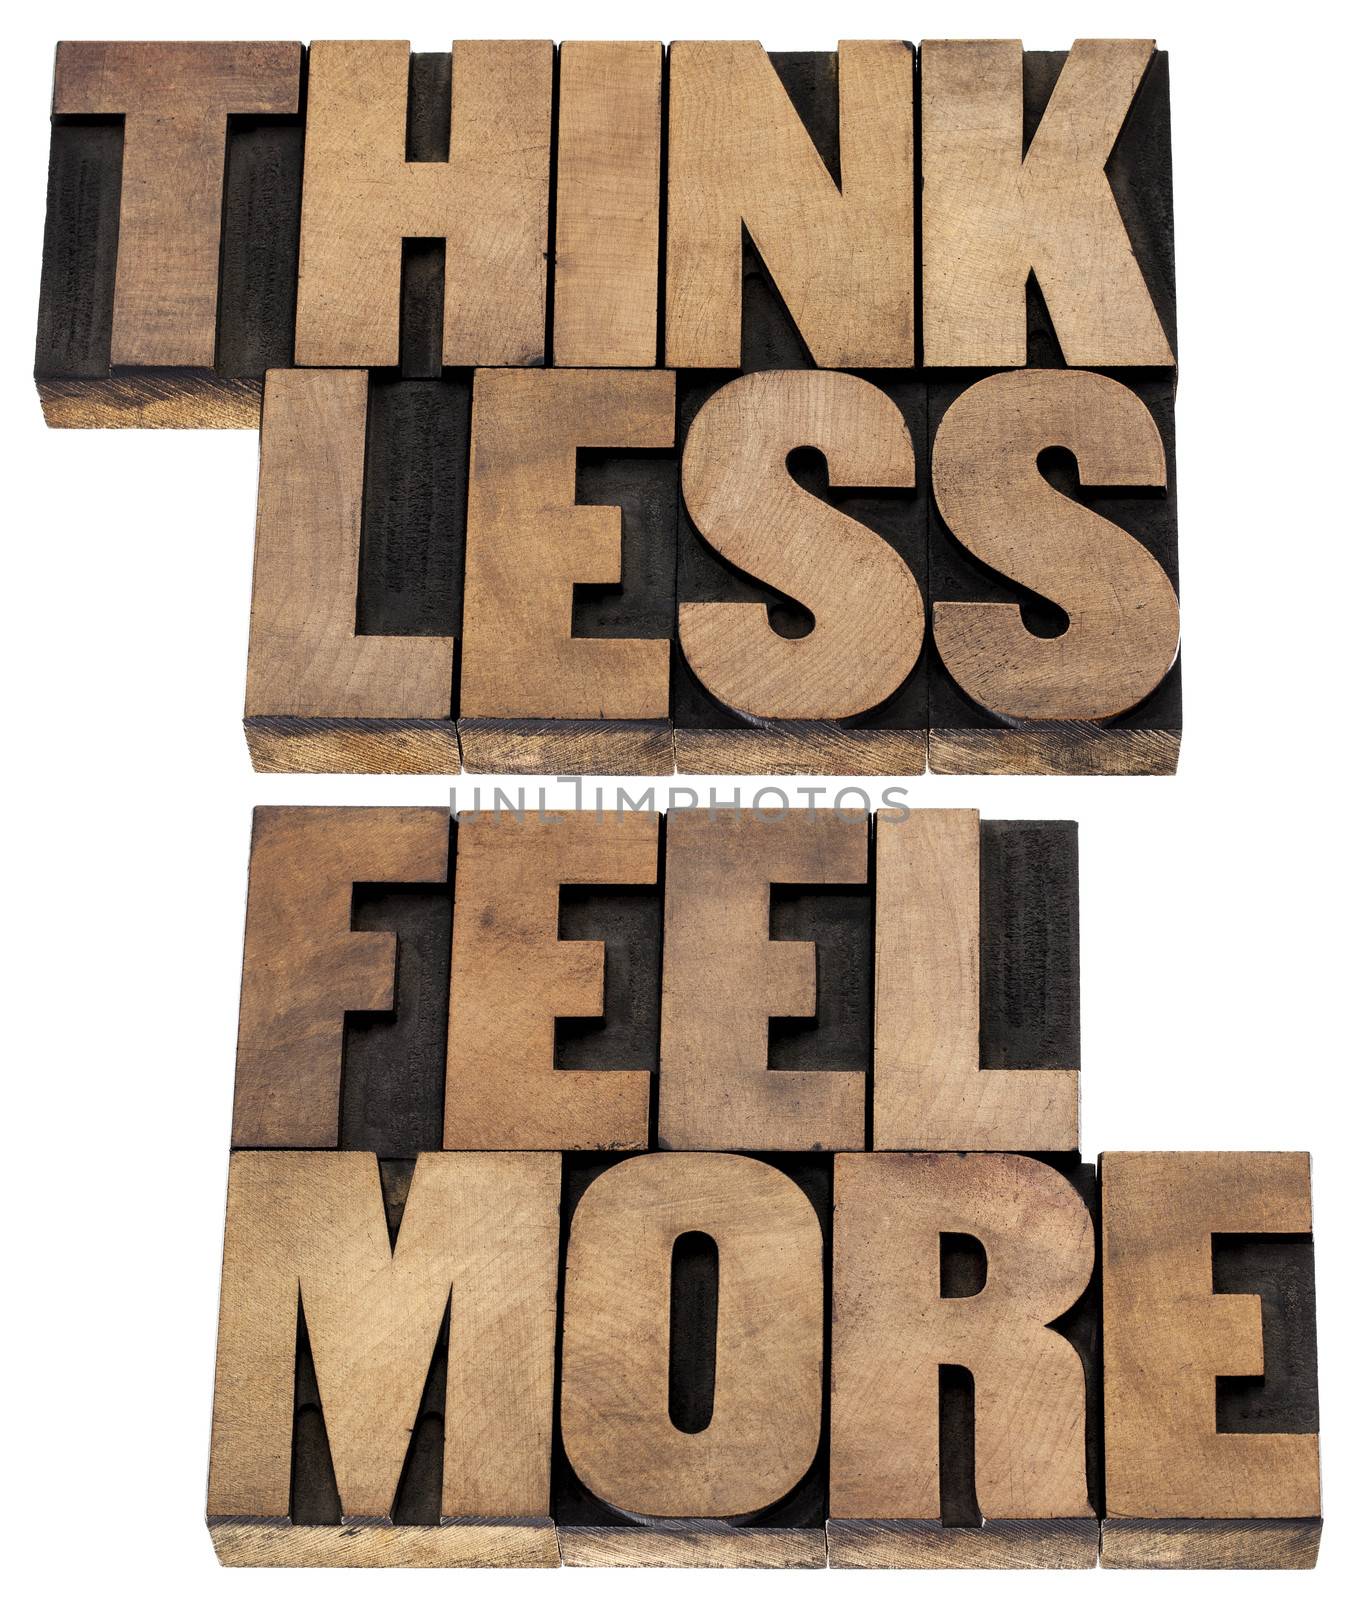 think less, feel more - words of wisdom - isolated tex in vintage letterpress wood type